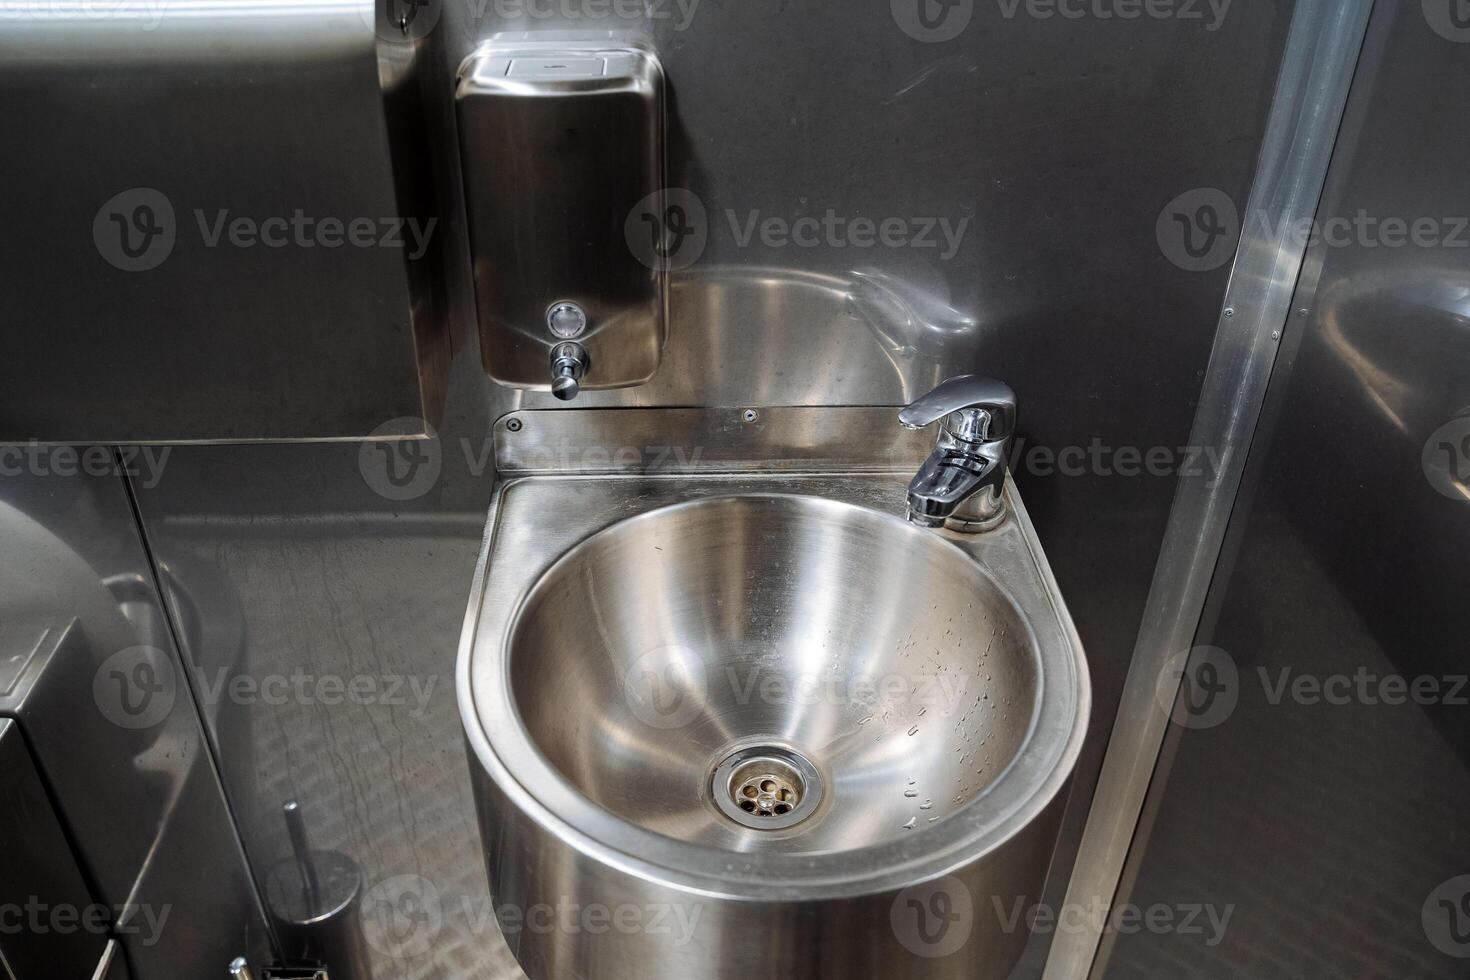 Stainless steel metal sink, soap dispenser, small faucet, hand sink, anti-vandal washbasin, public toilet in the city. photo